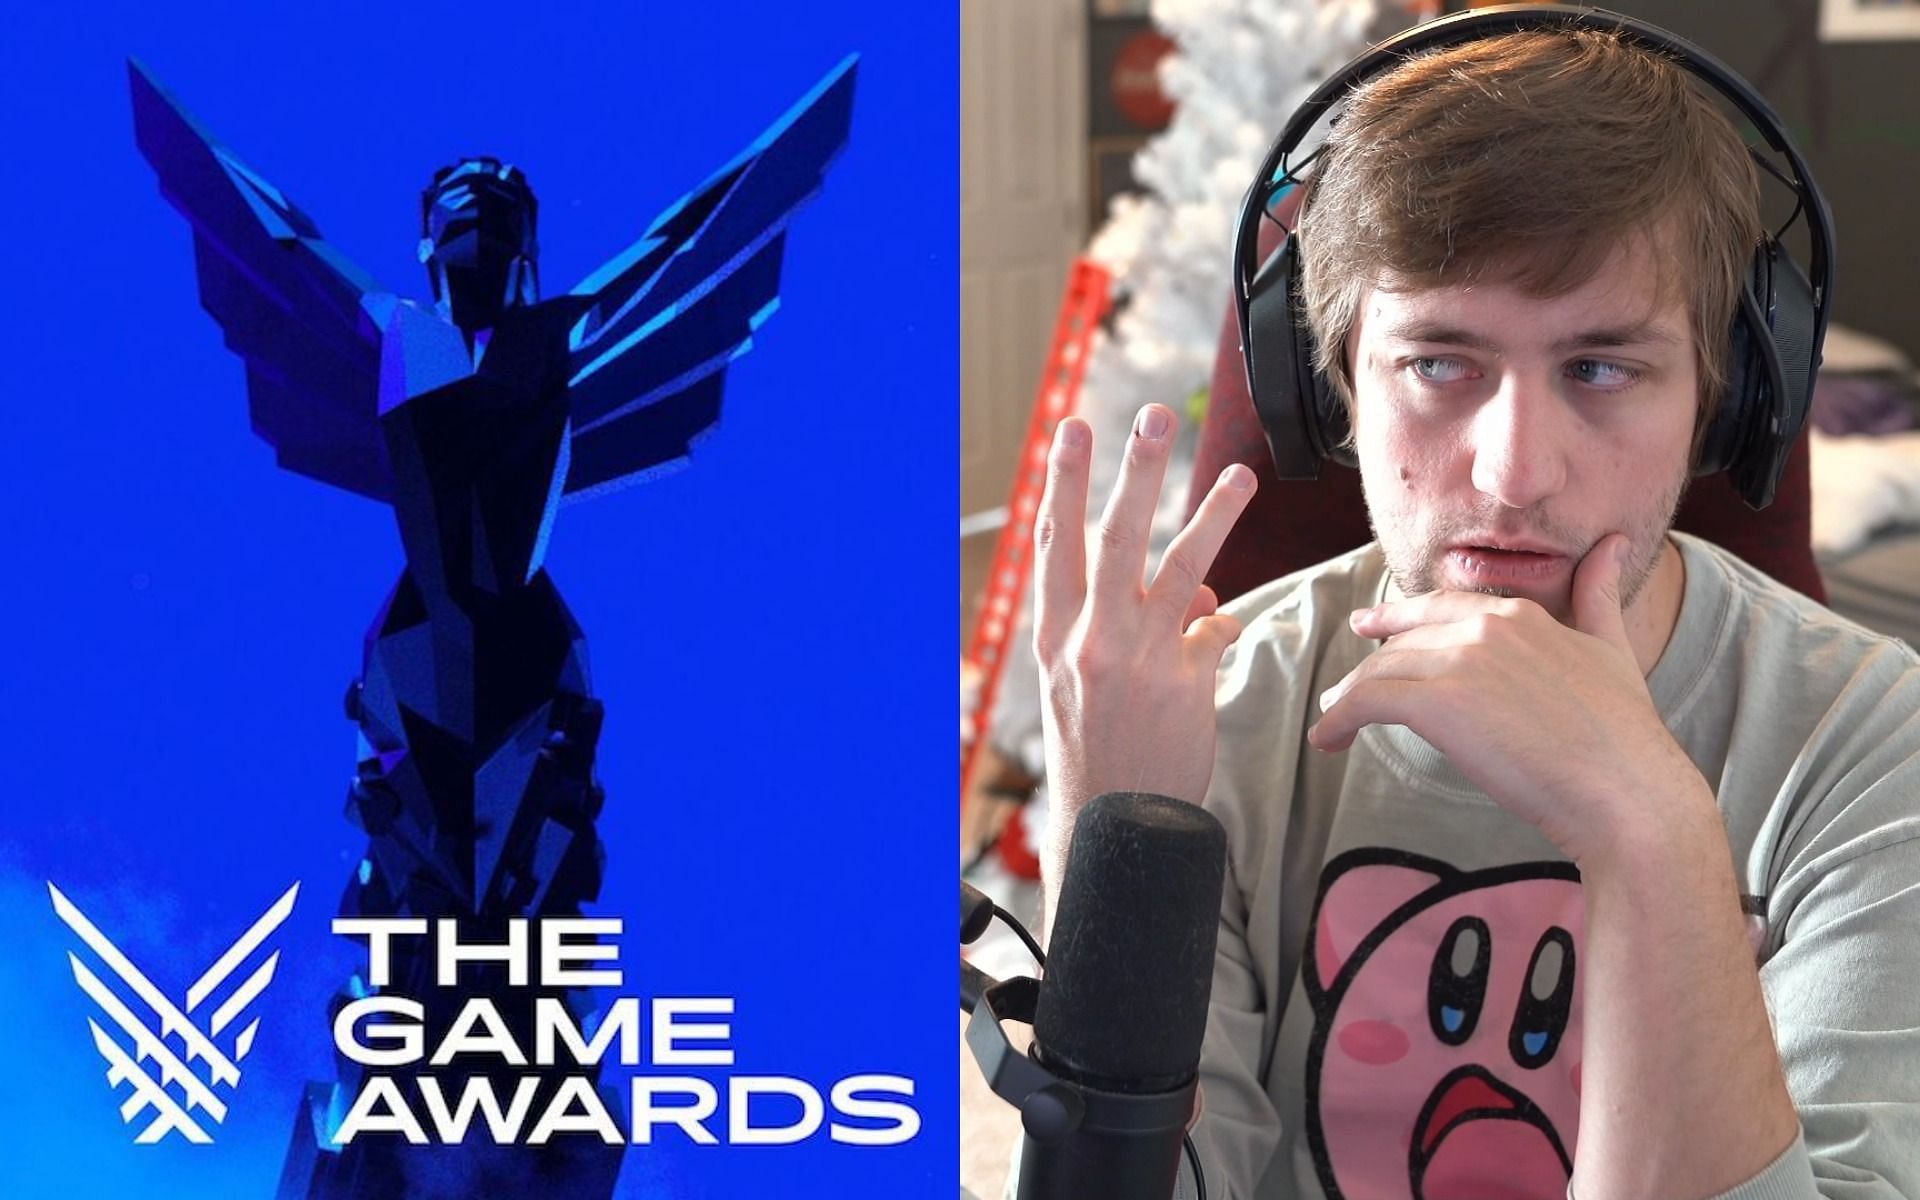 Sodapoppin was disappointed with The Game Awards 2021 (Image via The Game Awards, Sodapoppin/Twitch)